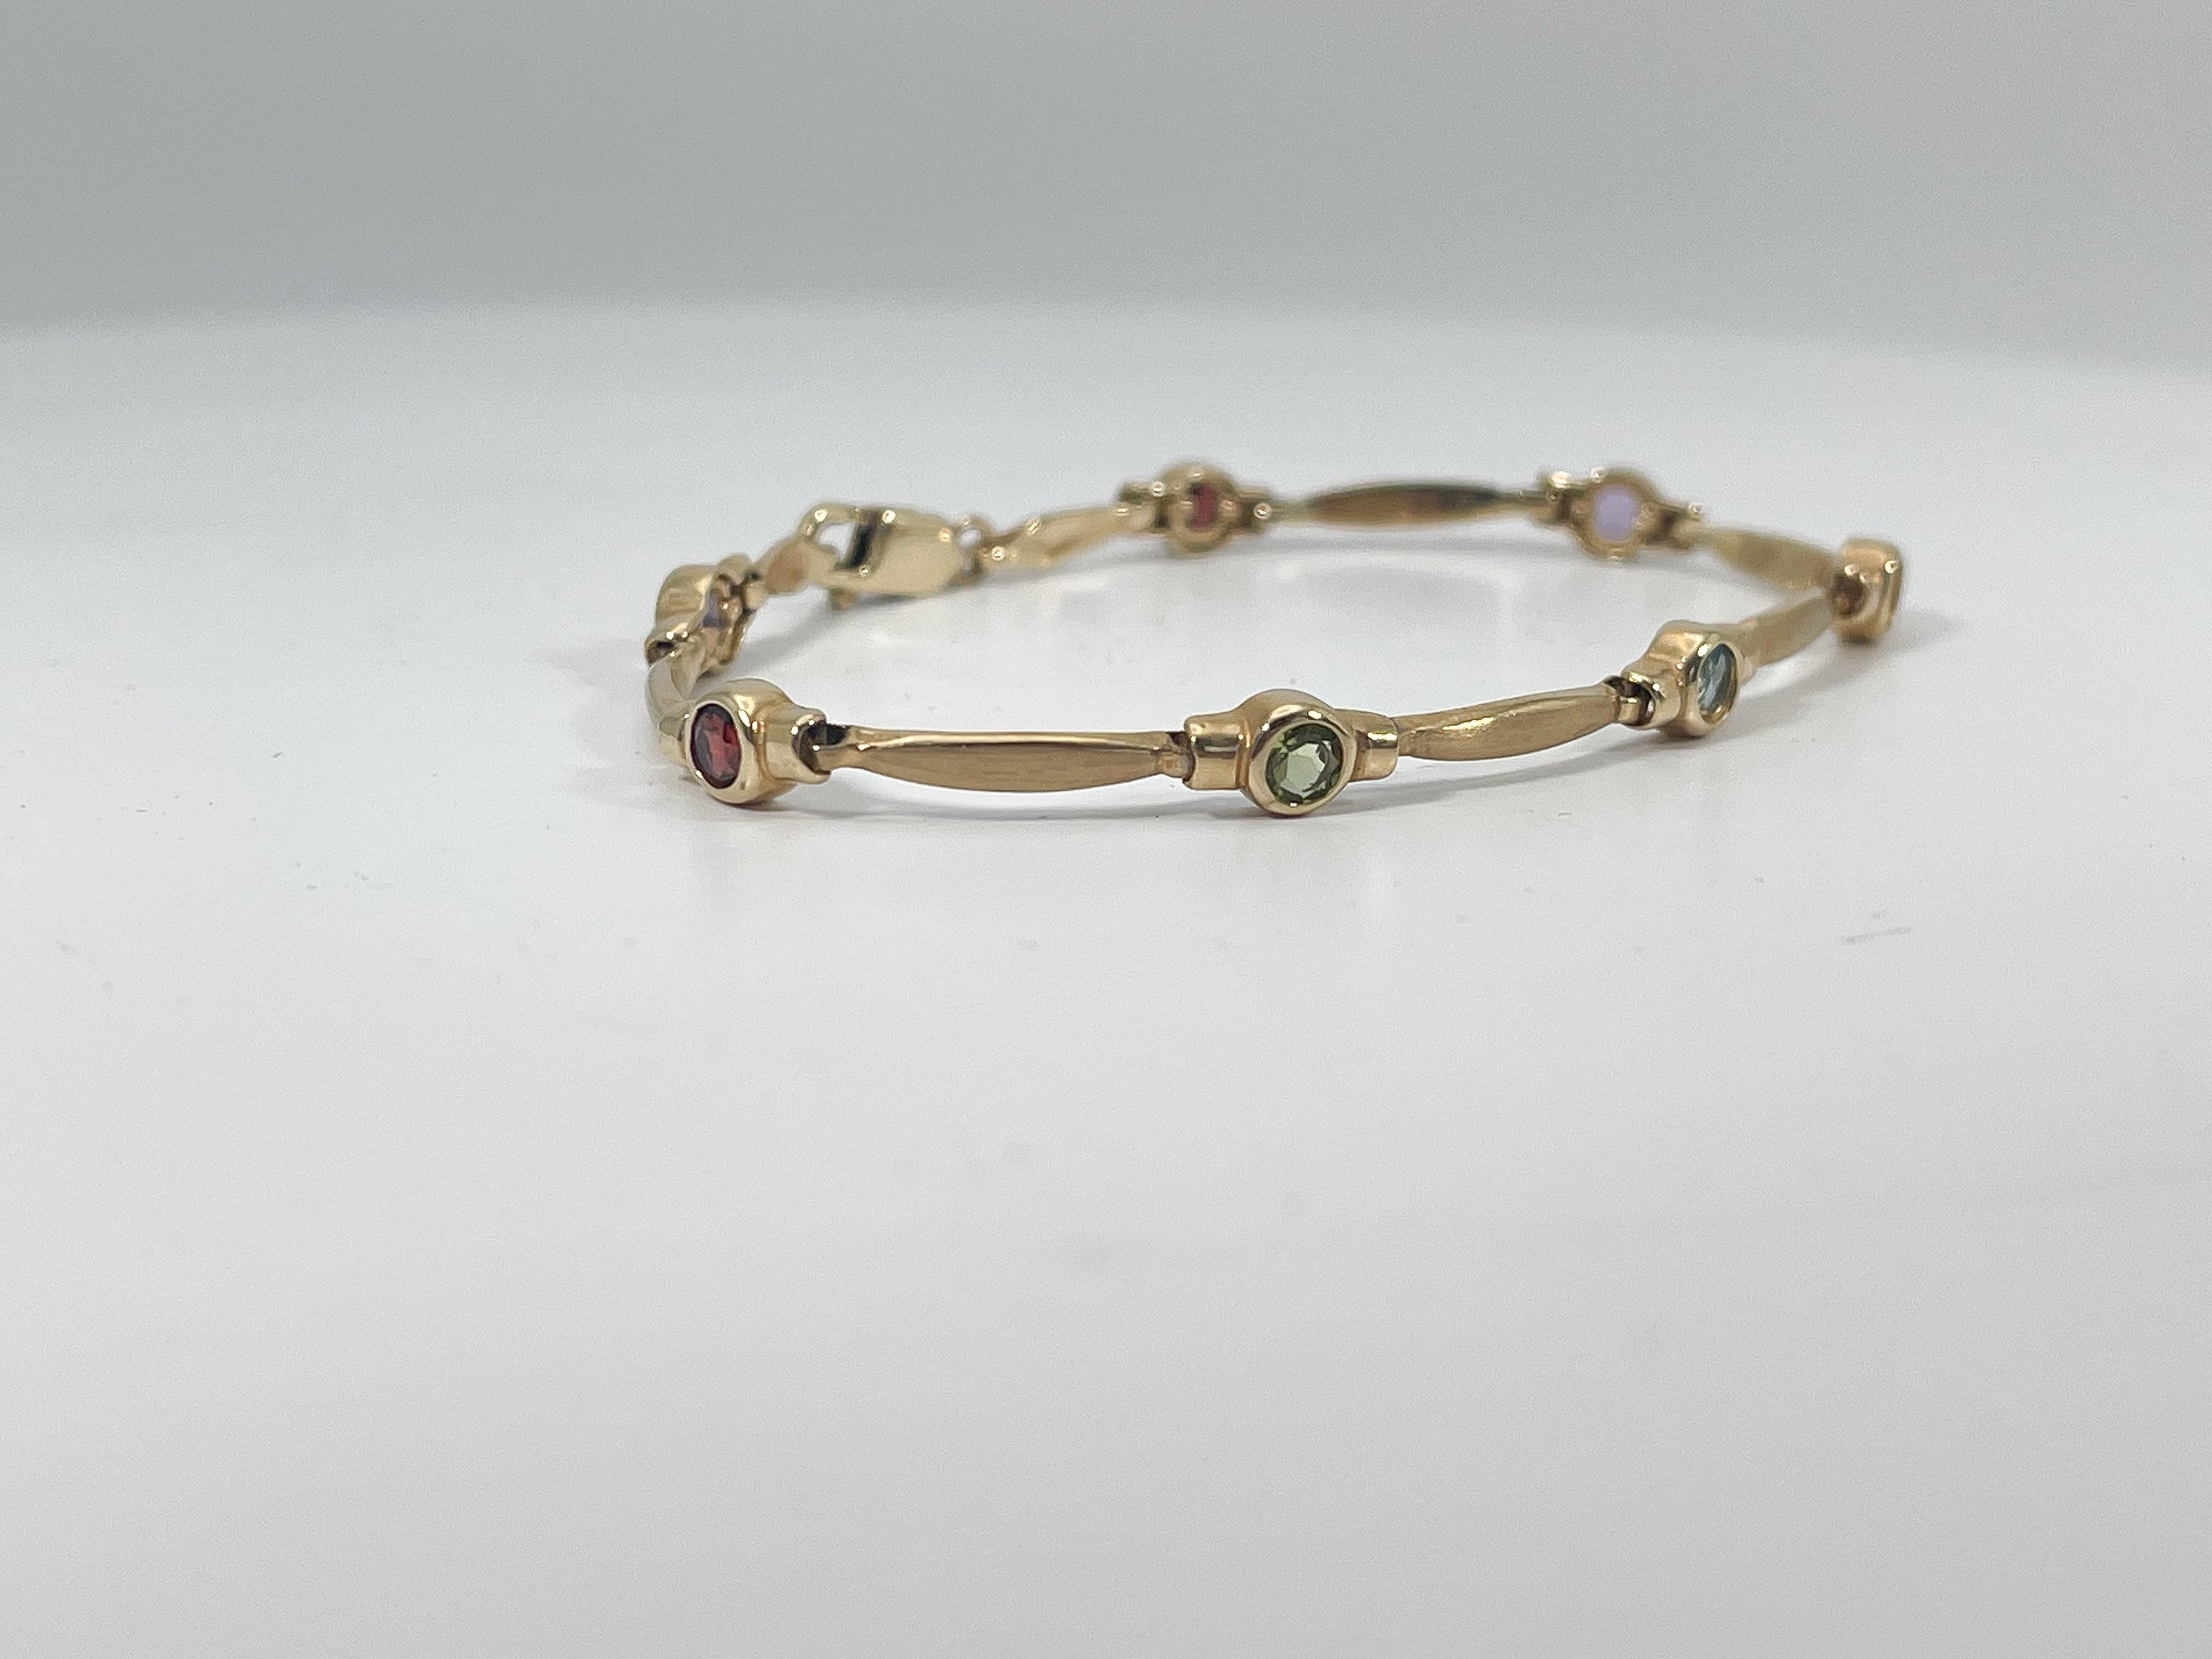 14K Yellow Gold Round Bezel Colored Citrine Bracelet  In Excellent Condition For Sale In Stuart, FL